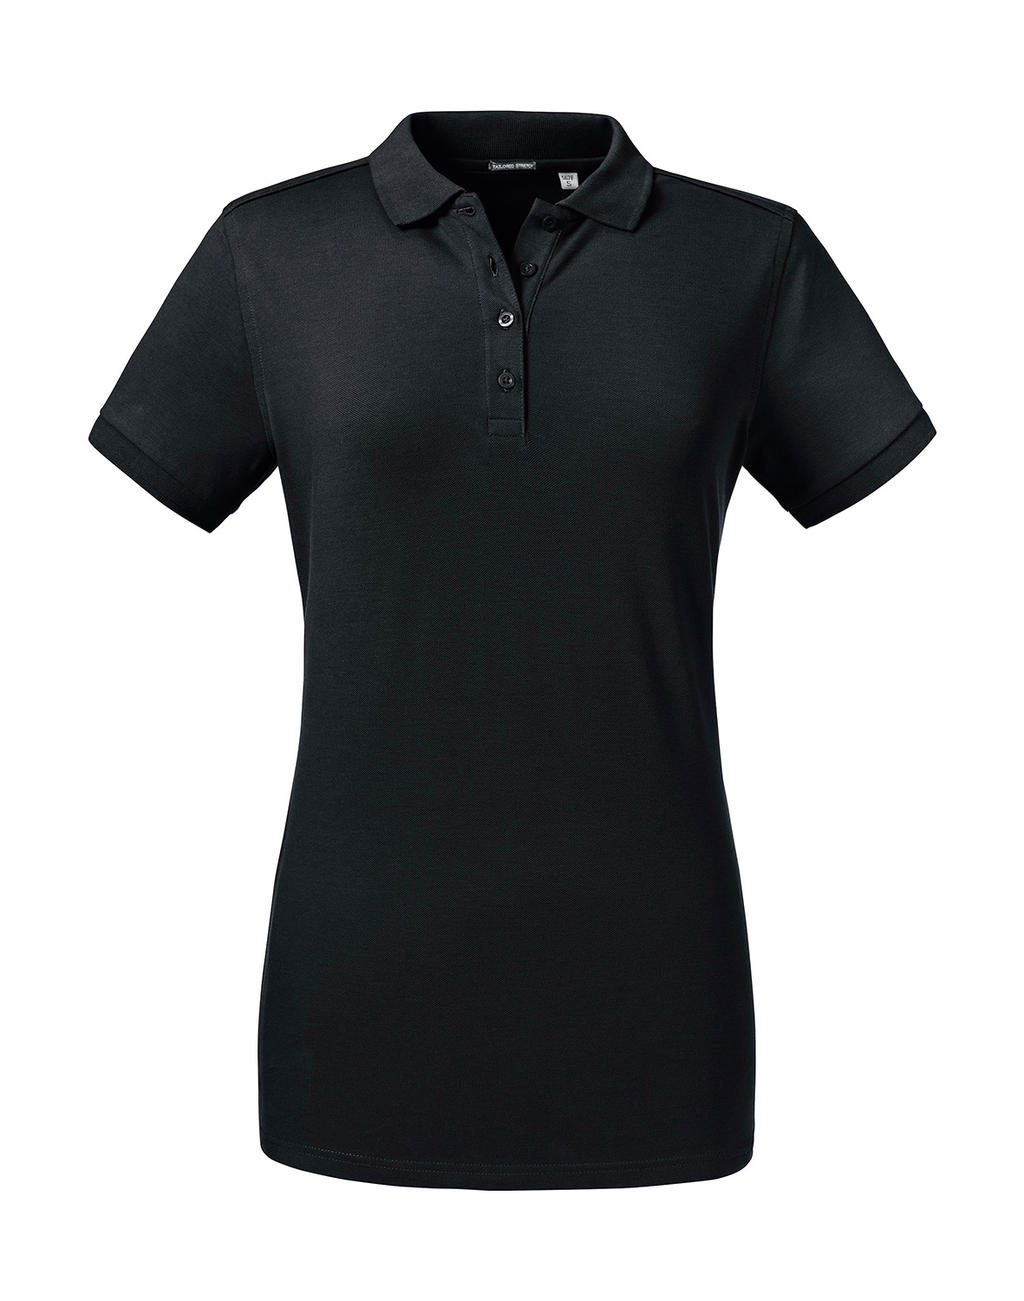  Ladies Tailored Stretch Polo in Farbe Black